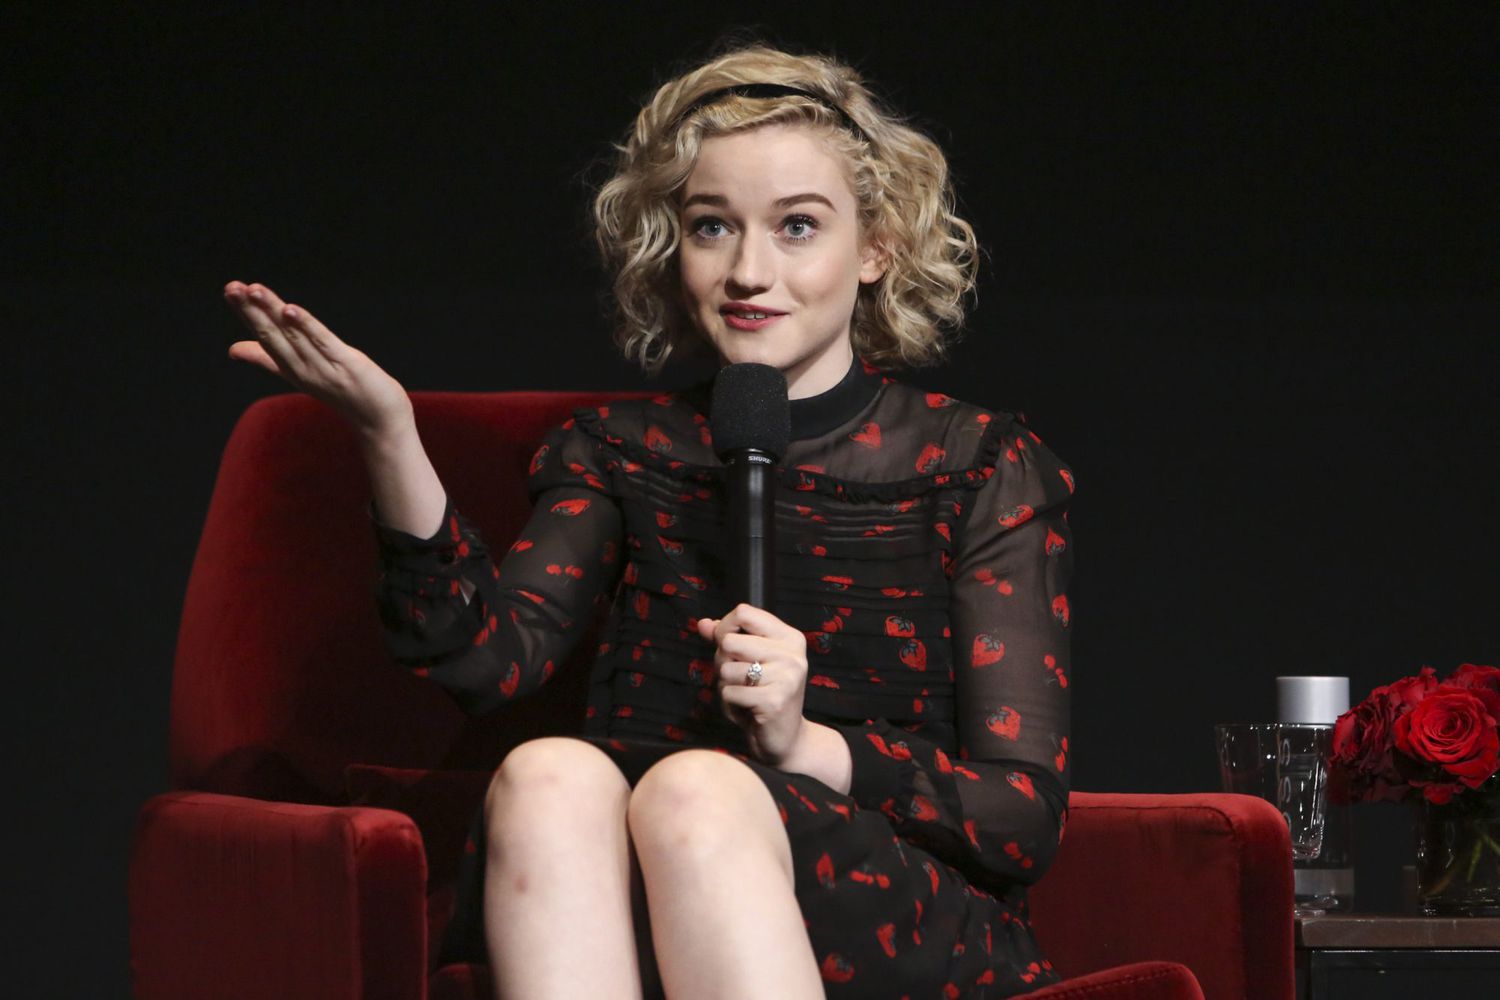 NORTH HOLLYWOOD, CALIFORNIA - MAY 02: Julia Garner speaks during the FYC panel of Bravo's "Dirty John" at Saban Media Center on May 02, 2019 in North Hollywood, California. (Photo by: Jesse Grant/Bravo)